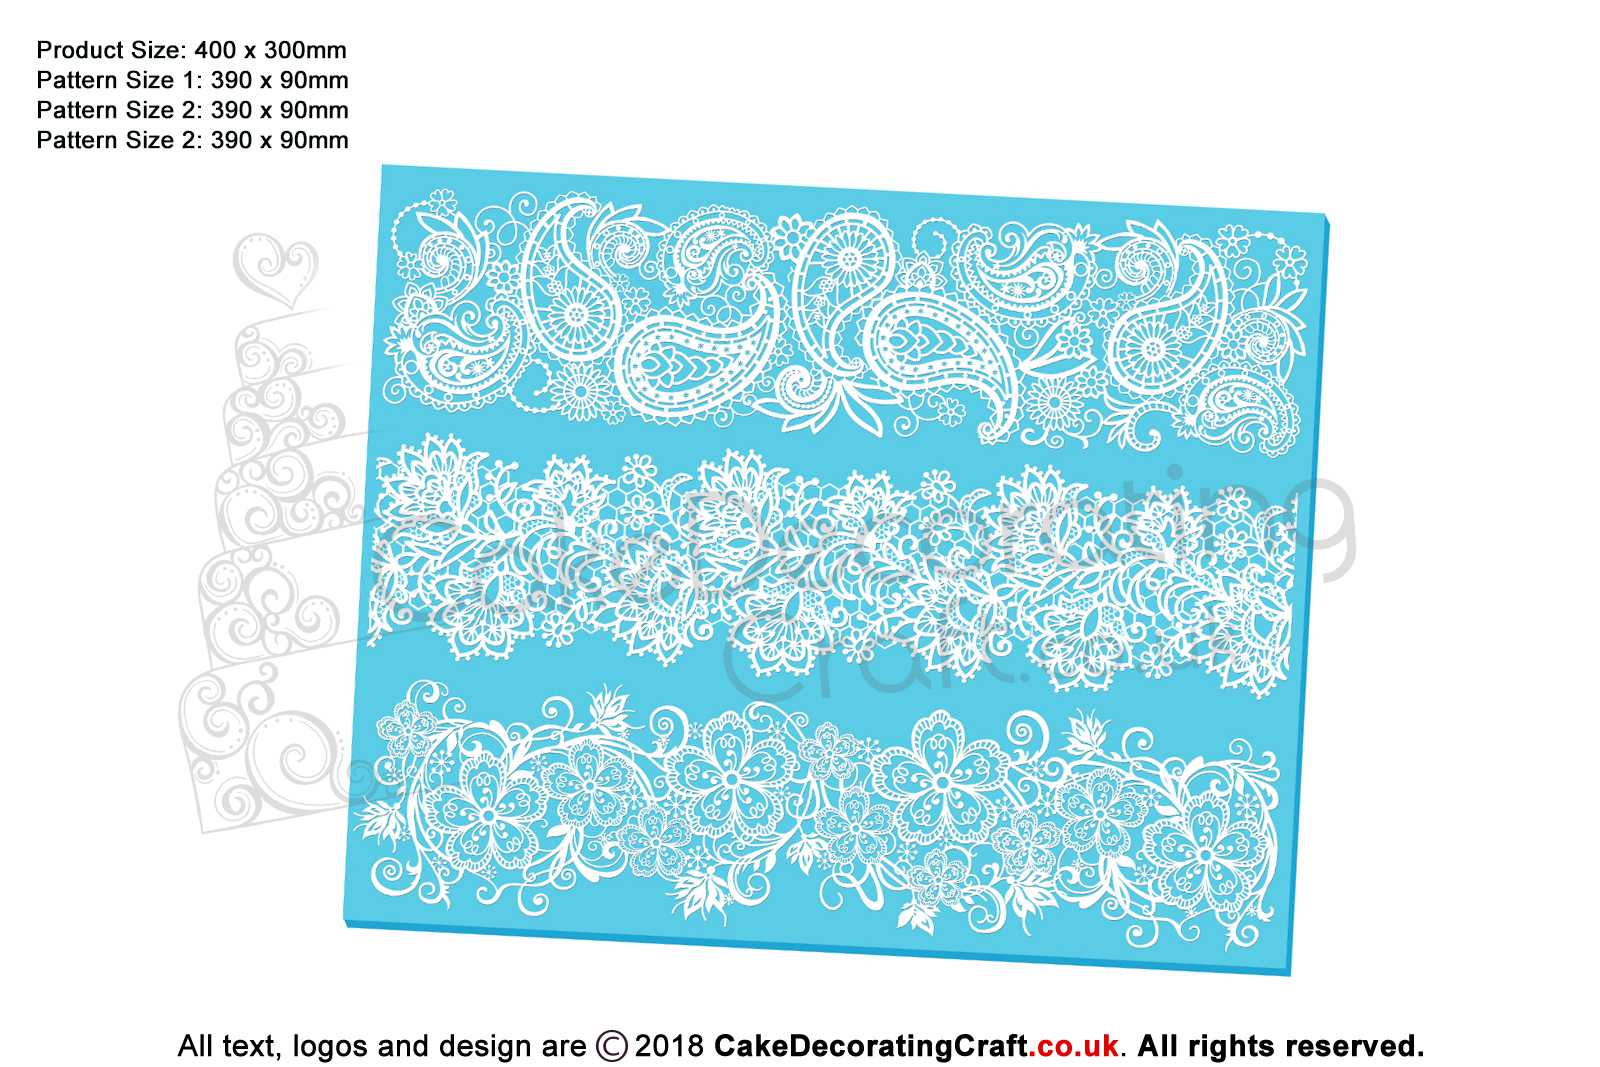 Madeline | Cake Lace Mats for Edible Cake Lace Mixes and Premixes | Cake Decorating Craft Tool